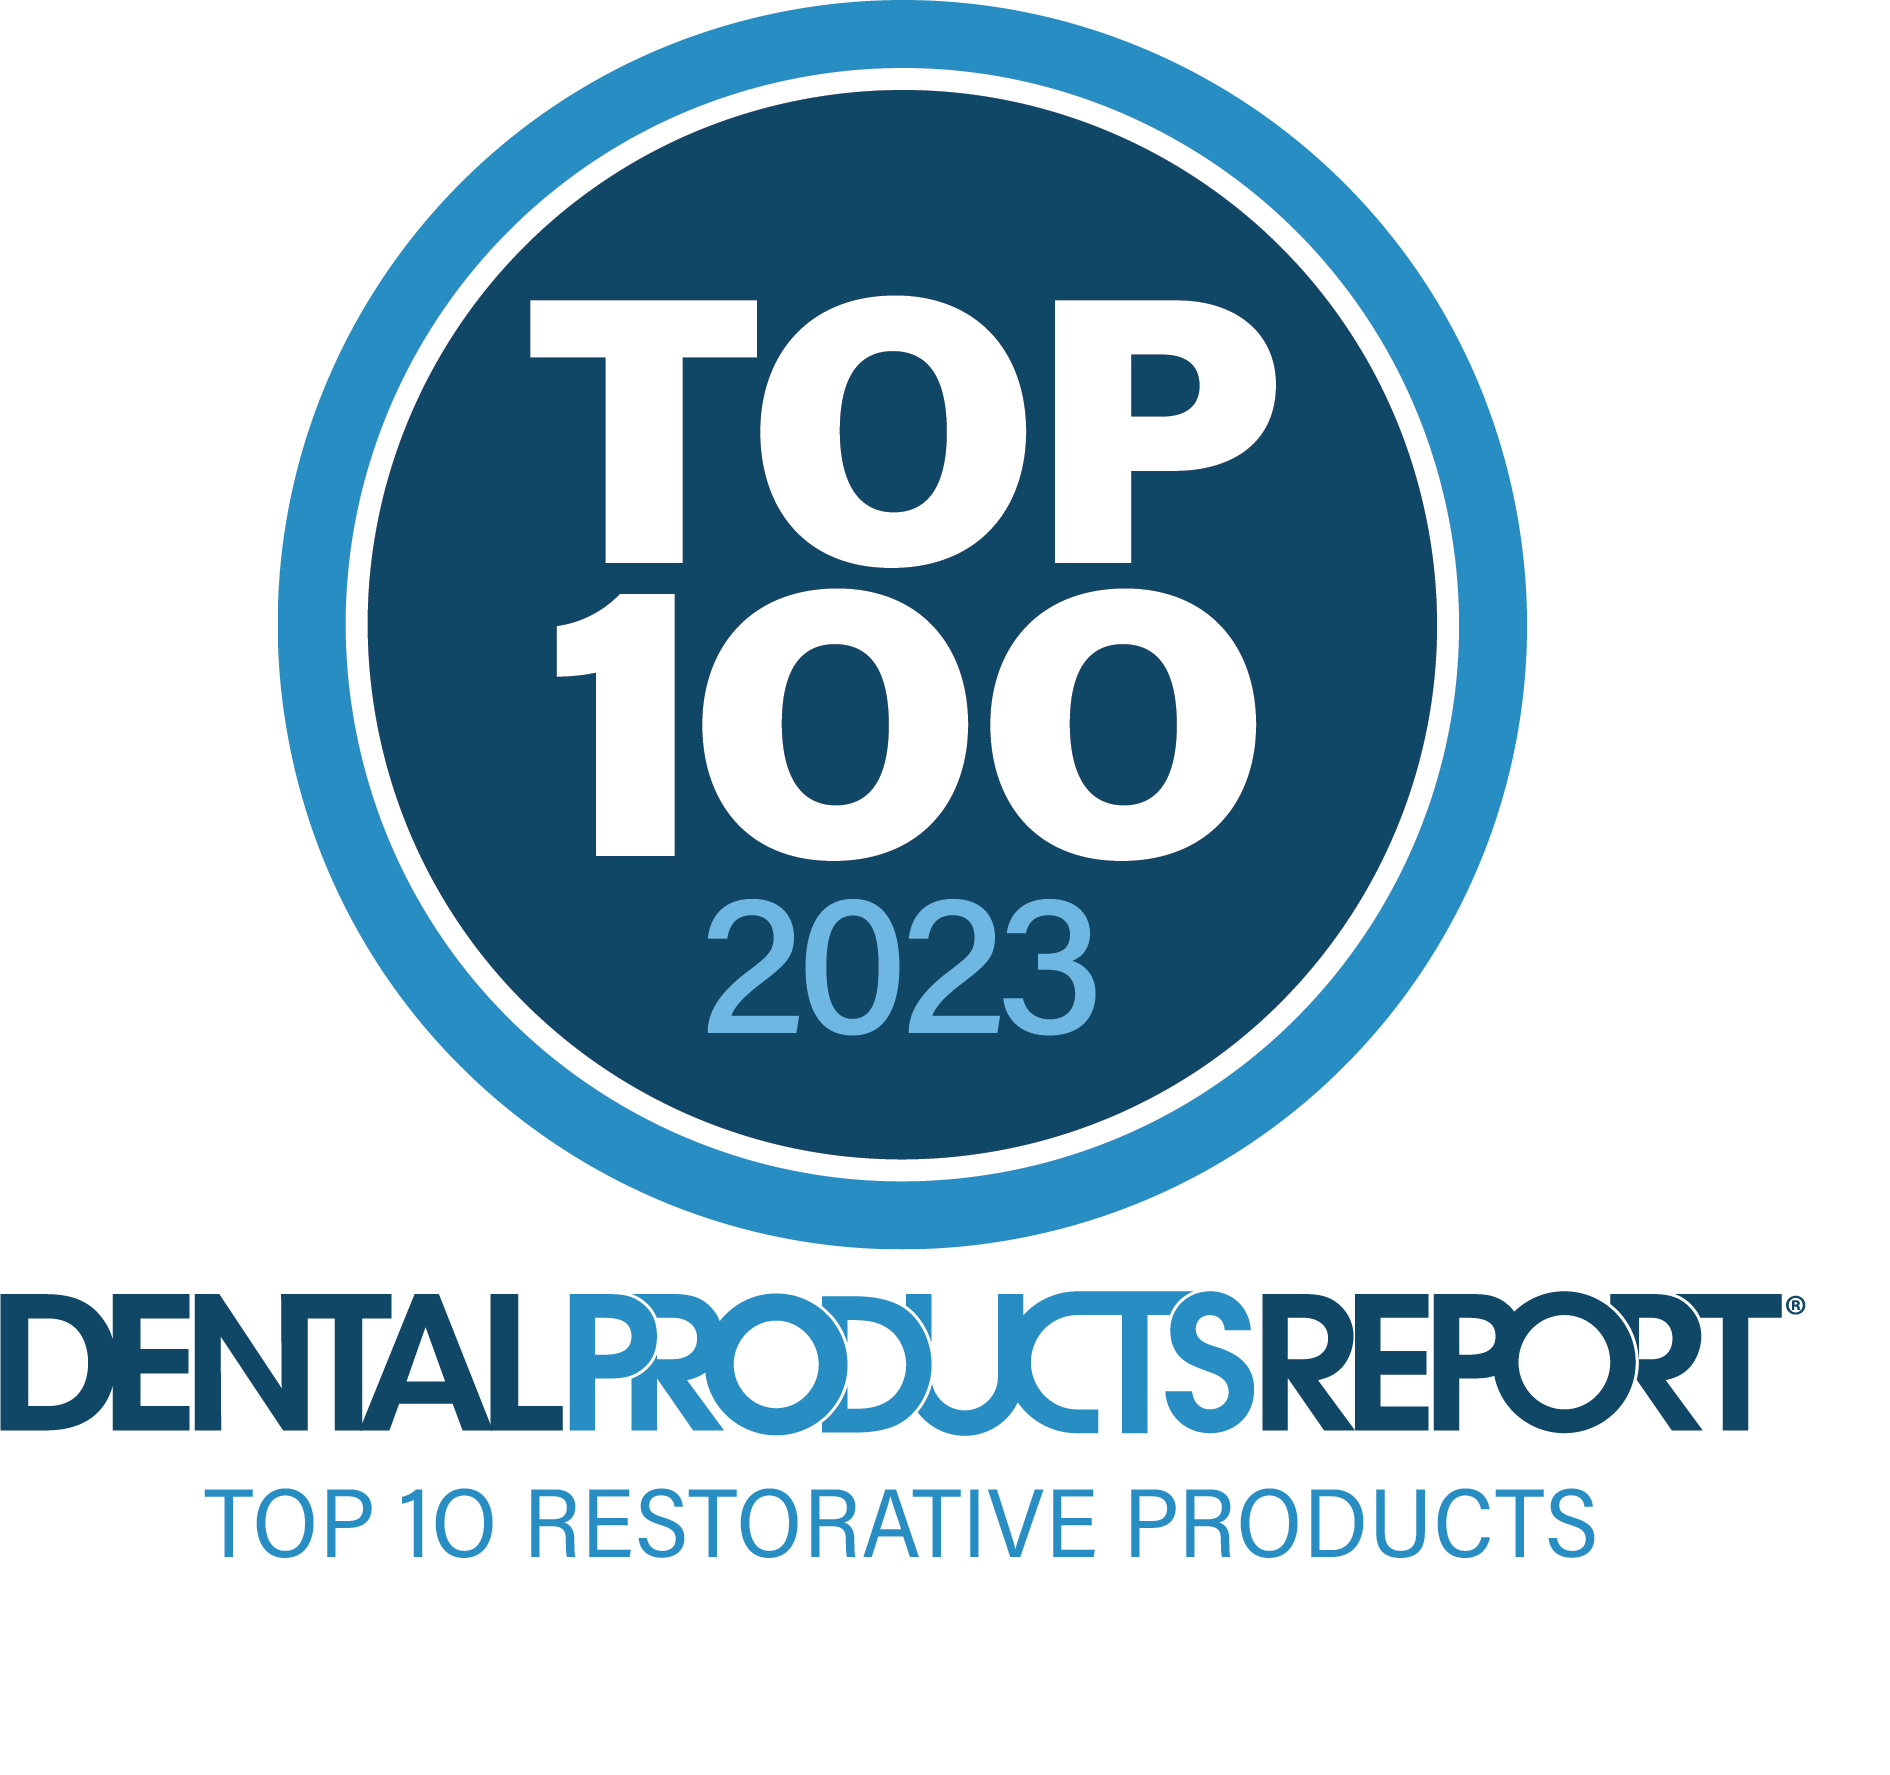 DPR Top 100: Top 10 Restorative Products of 2023